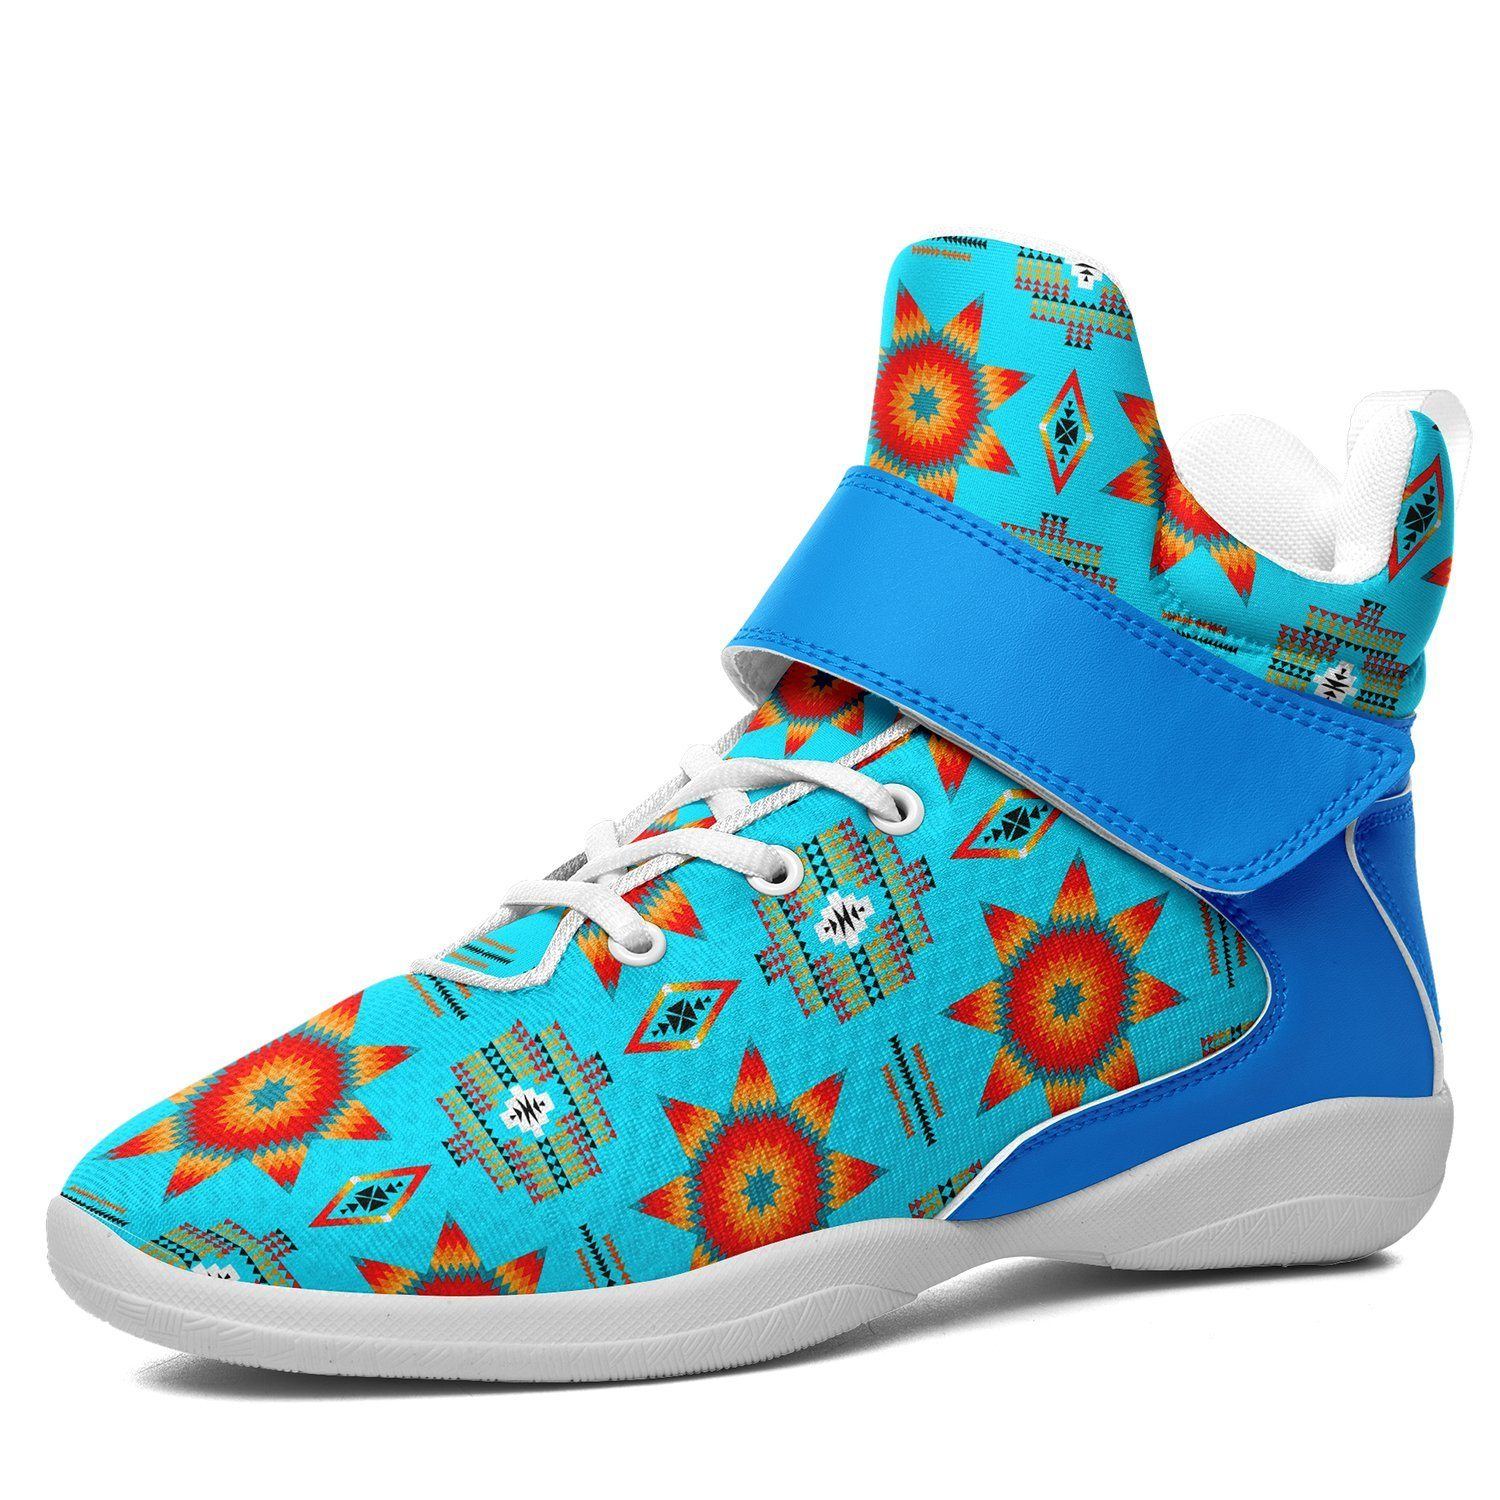 Rising Star Harvest Moon Ipottaa Basketball / Sport High Top Shoes - White Sole 49 Dzine US Men 7 / EUR 40 White Sole with Light Blue Strap 